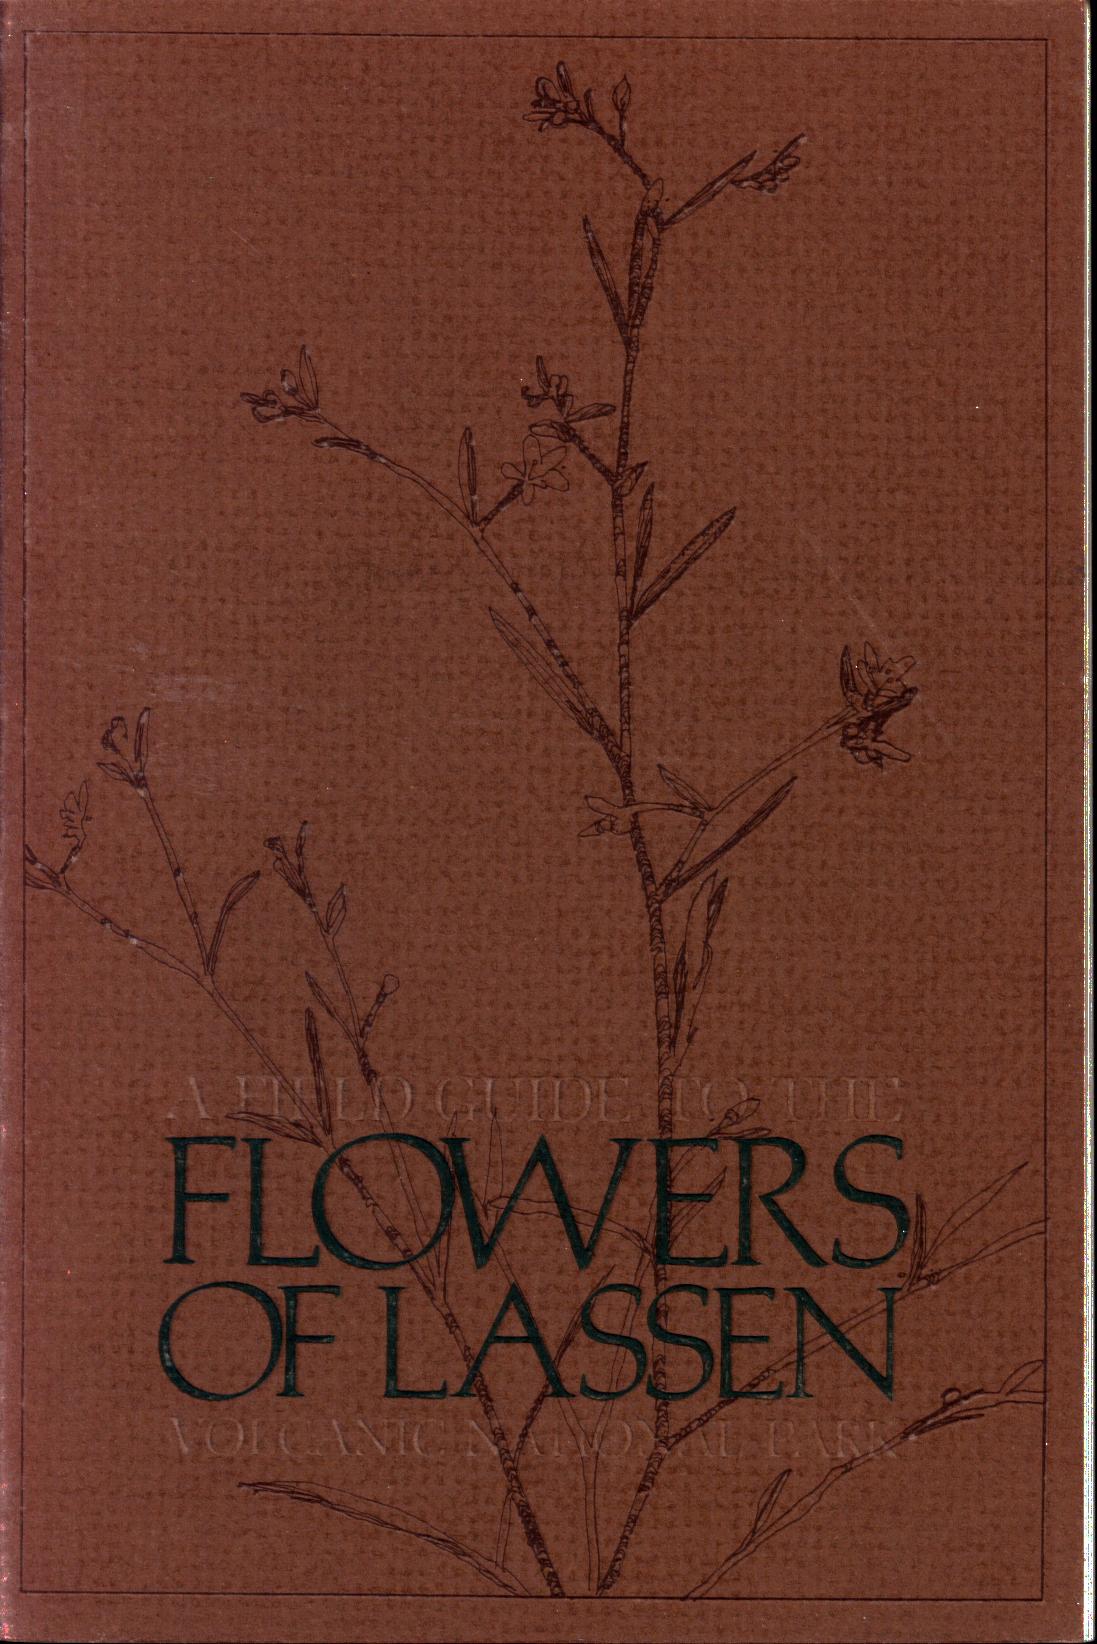 A FIELD GUIDE TO THE FLOWERS OF LASSEN VOLCANIC NATIONAL PARK.